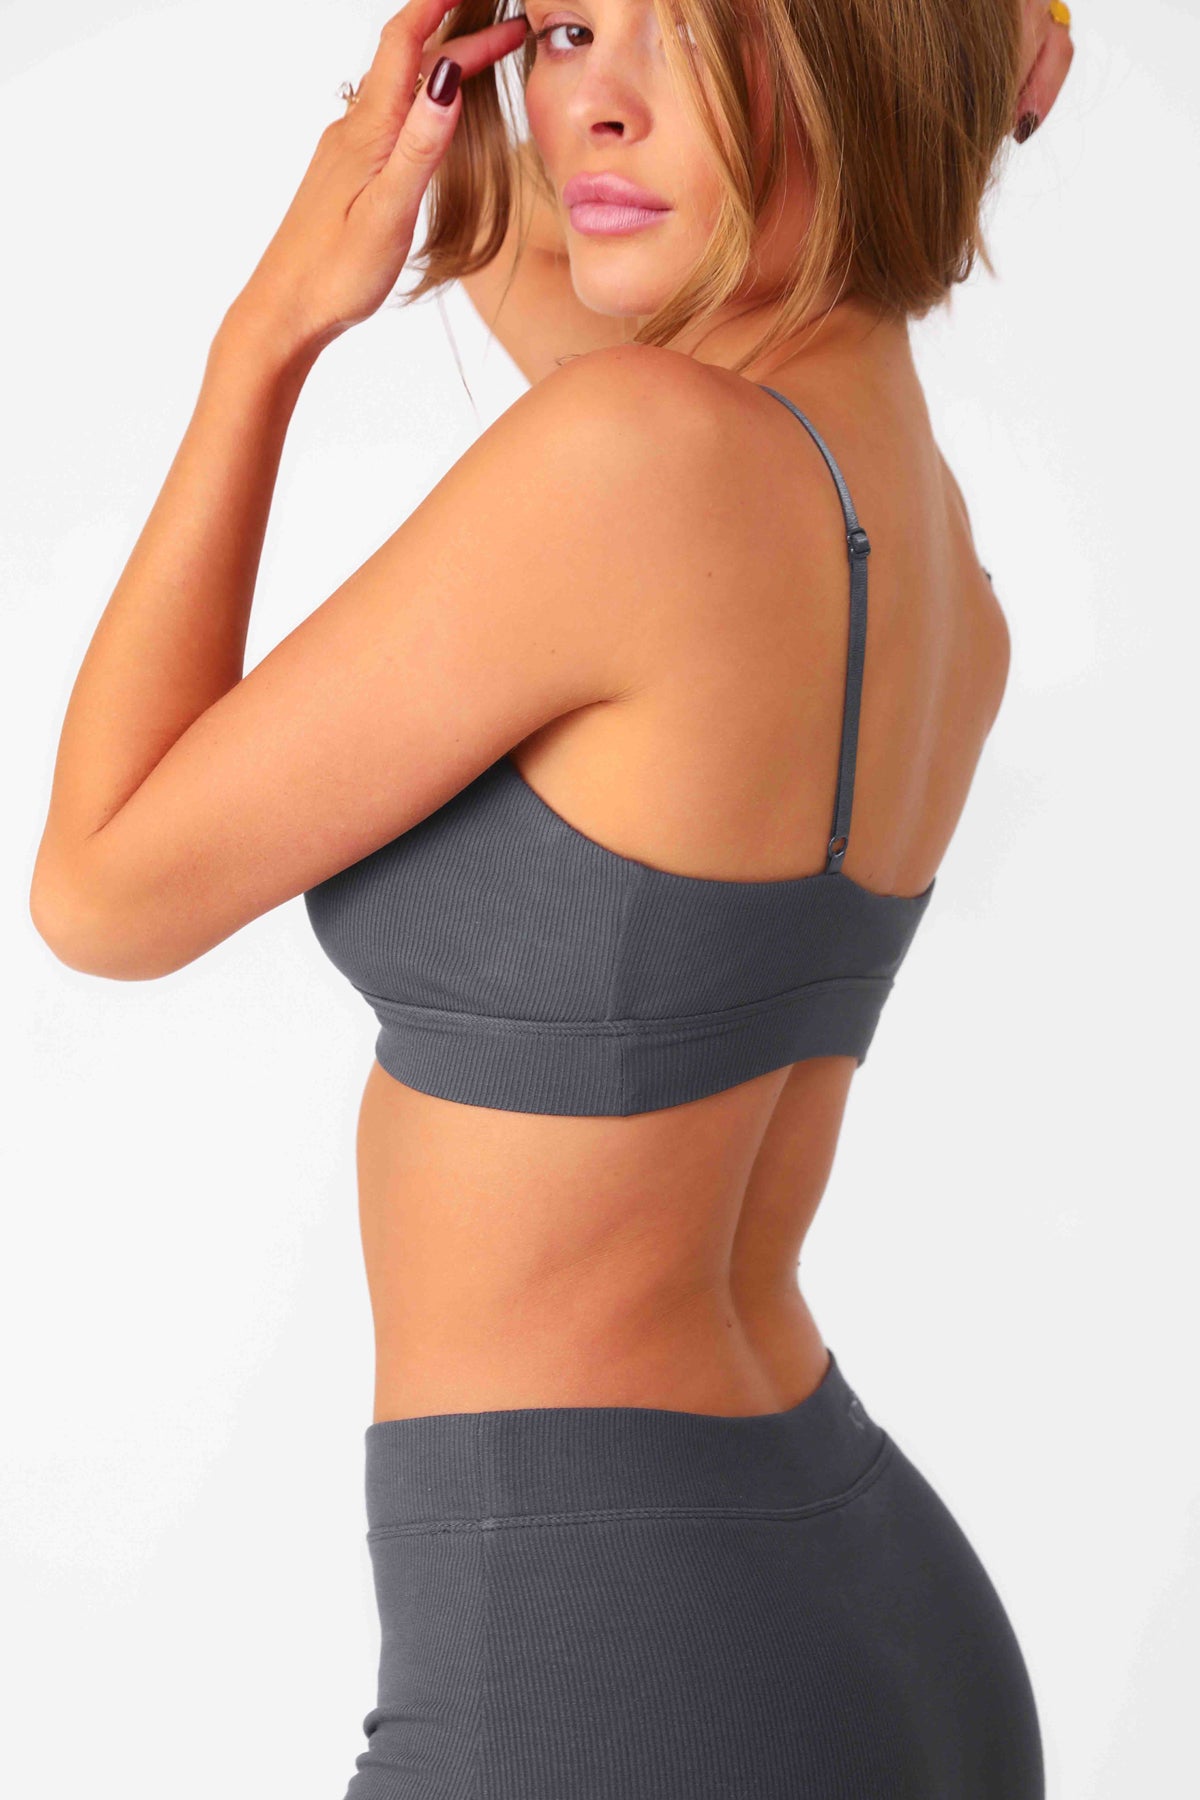 Model wearing Charcoal Ribbed Triangle Bralette, seamless rib fabrication with stretch.